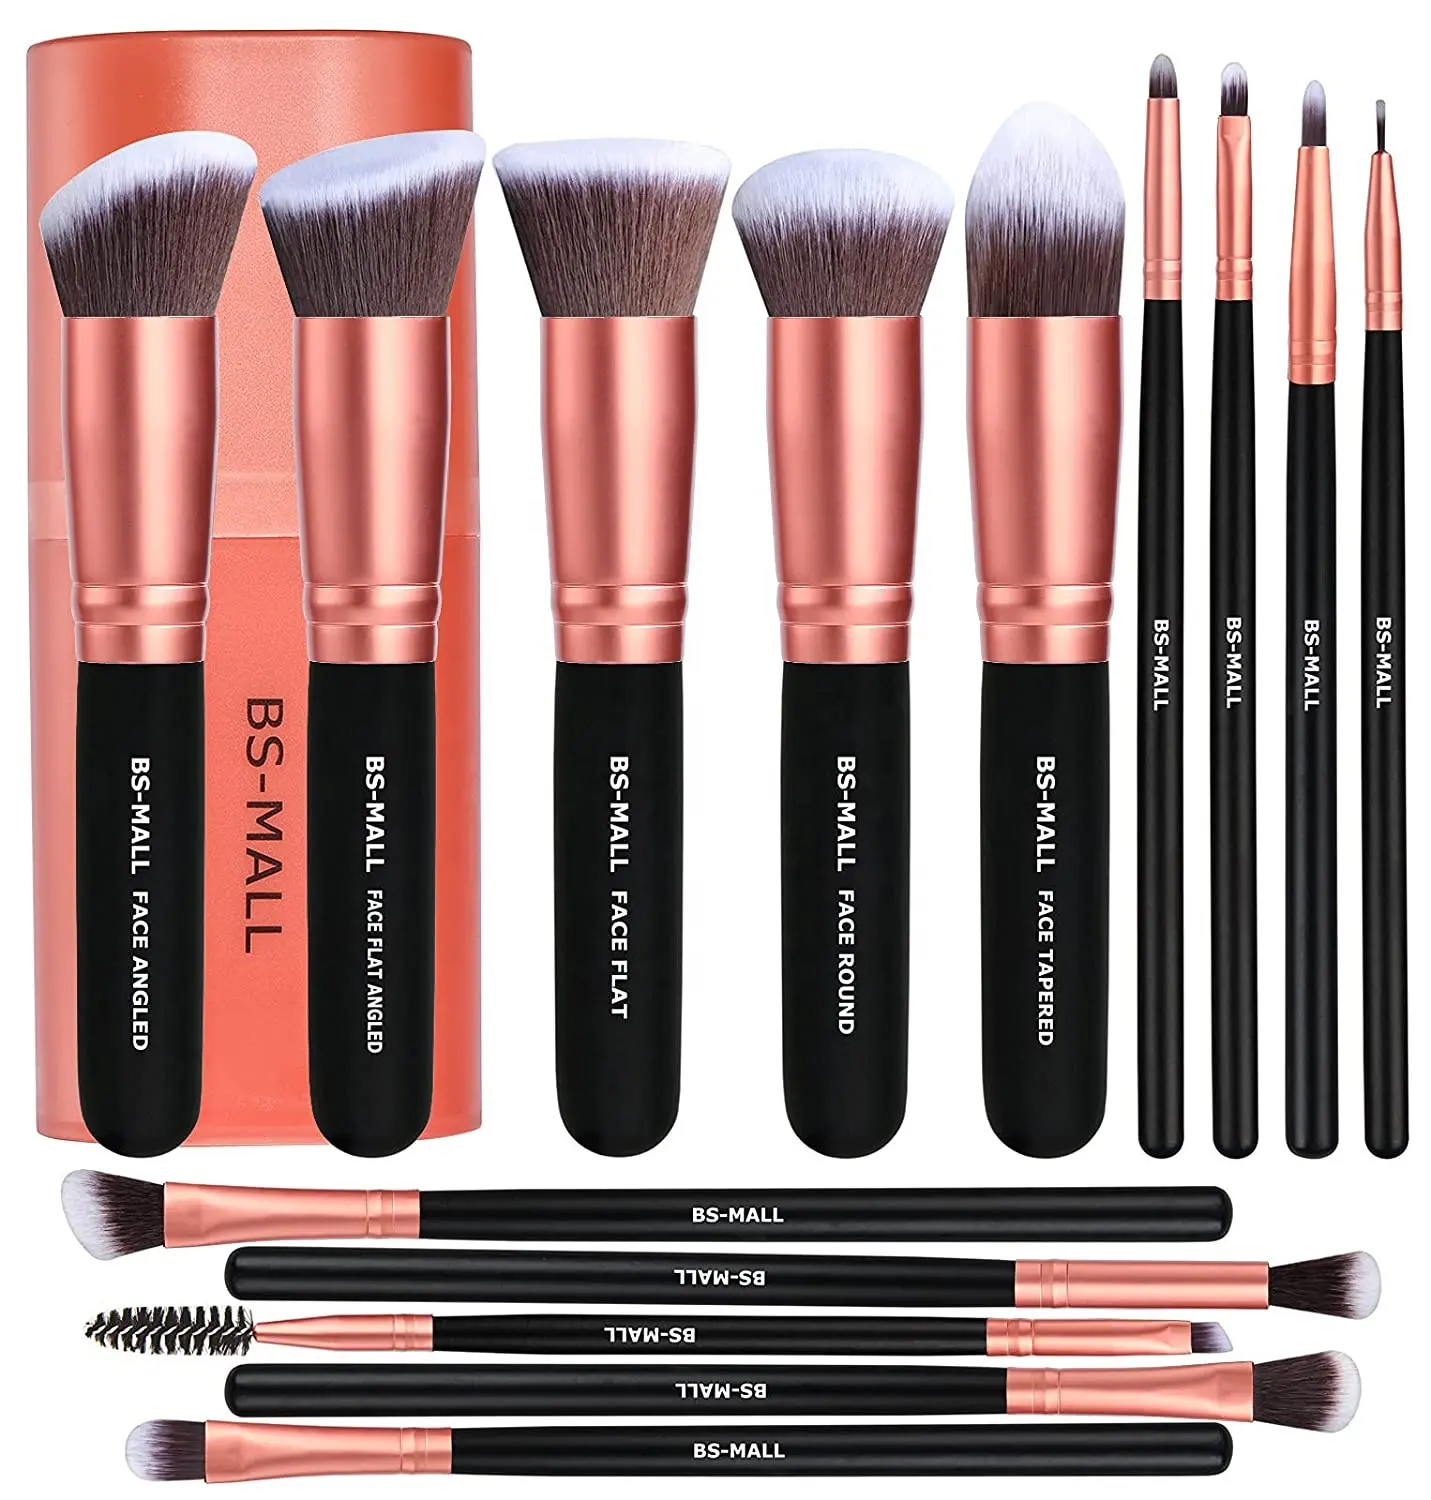 Wholesale 14 pcs Rose Gold Cosmetic Make up Brush Kit Private Label High Quality Makeup Brushes with Brush Holder